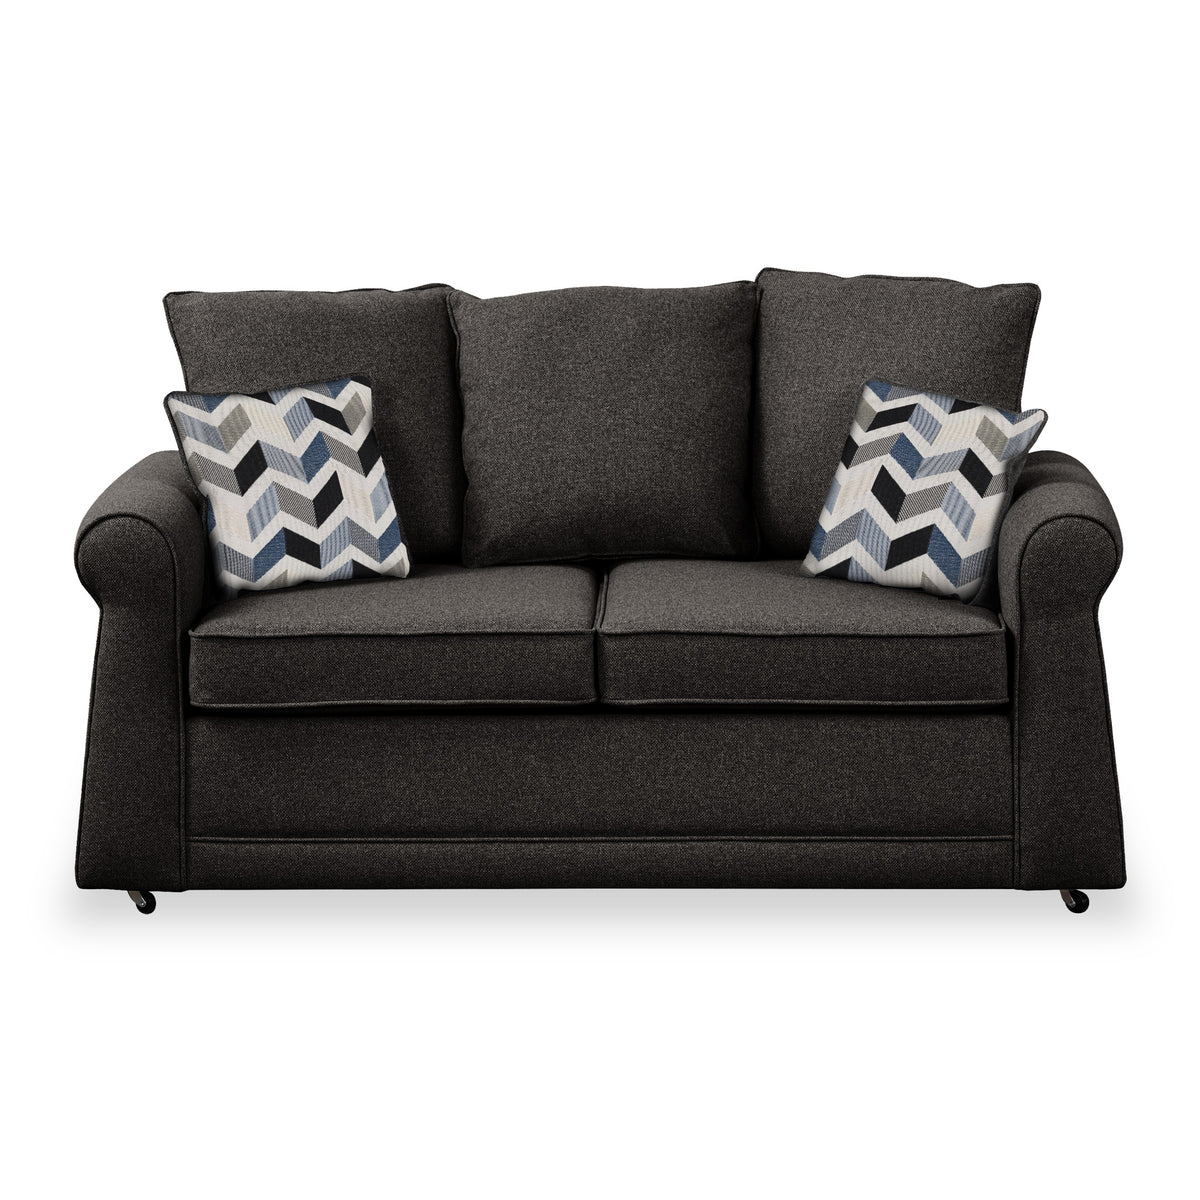 Broughton Faux Linen 2 Seater Sofabed with Denim Scatter Cushions from Roseland Furniture